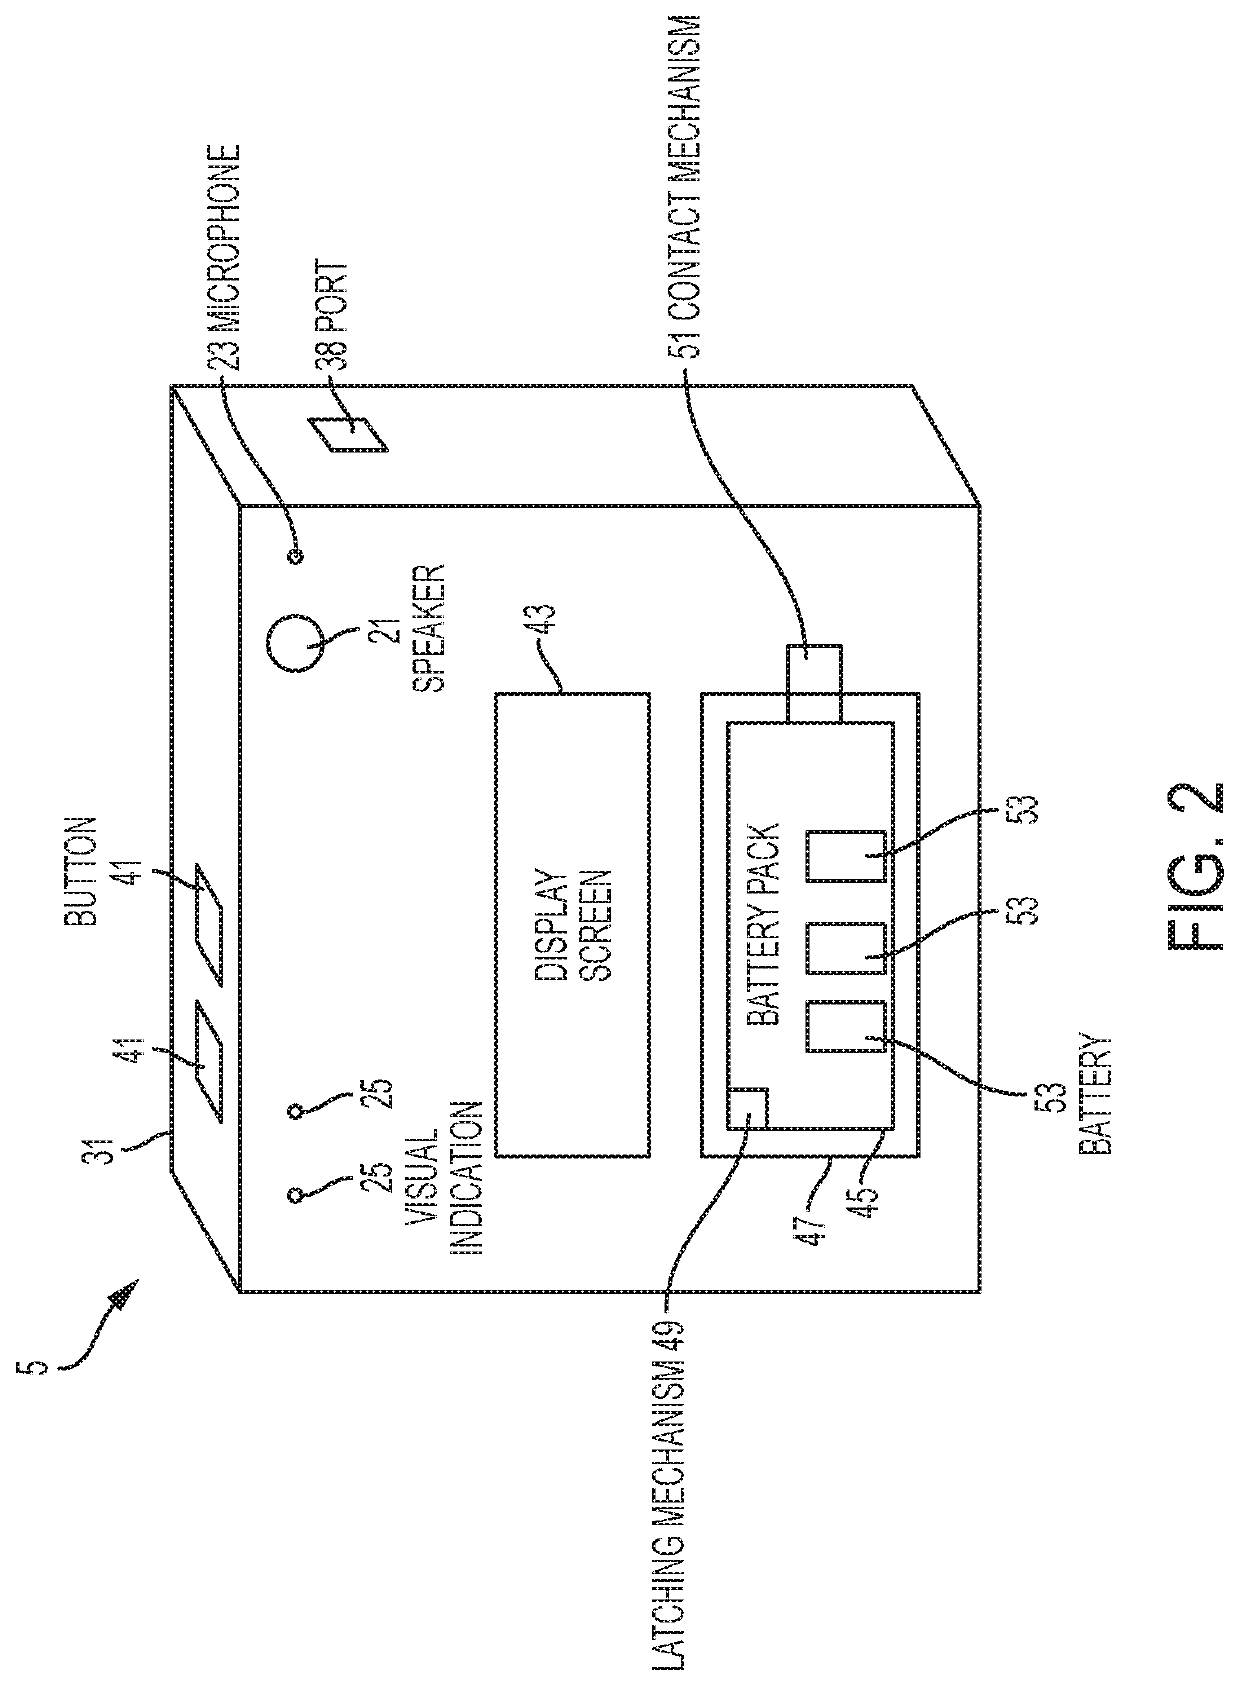 Systems and methods for monitoring battery life status